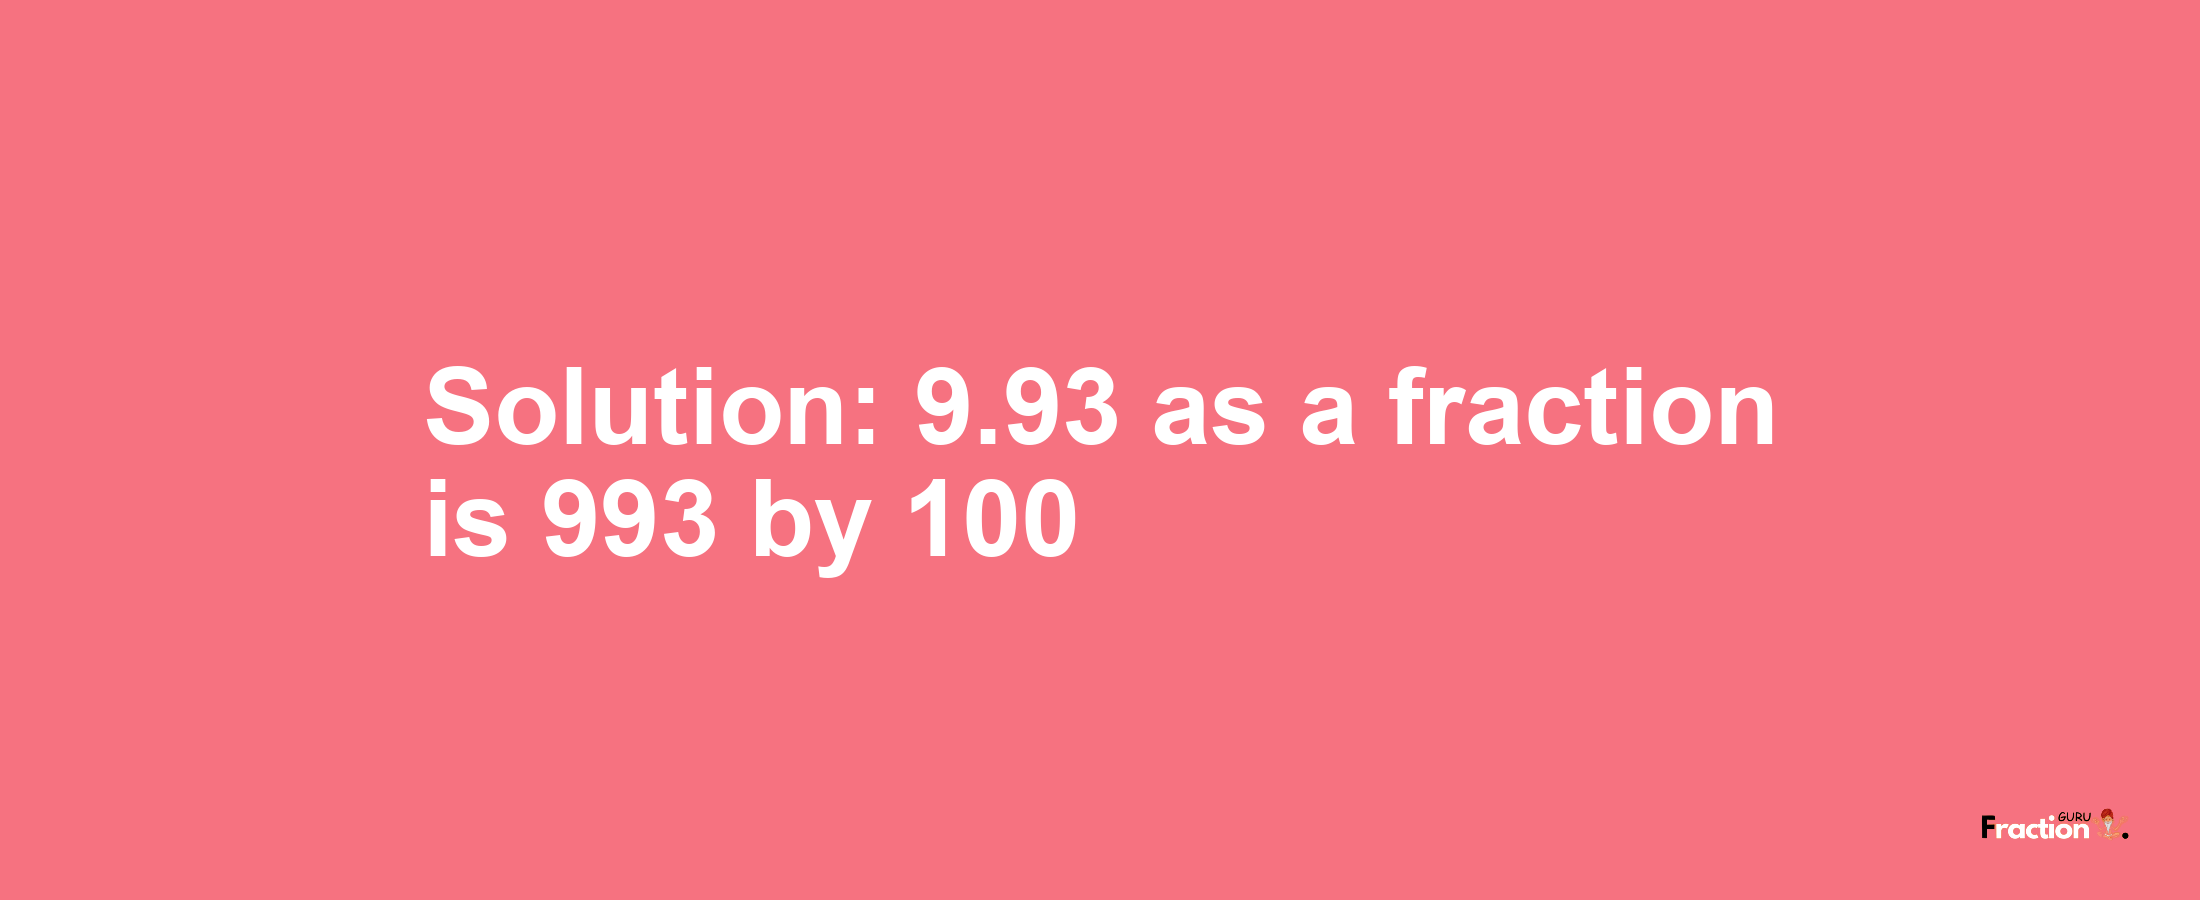 Solution:9.93 as a fraction is 993/100